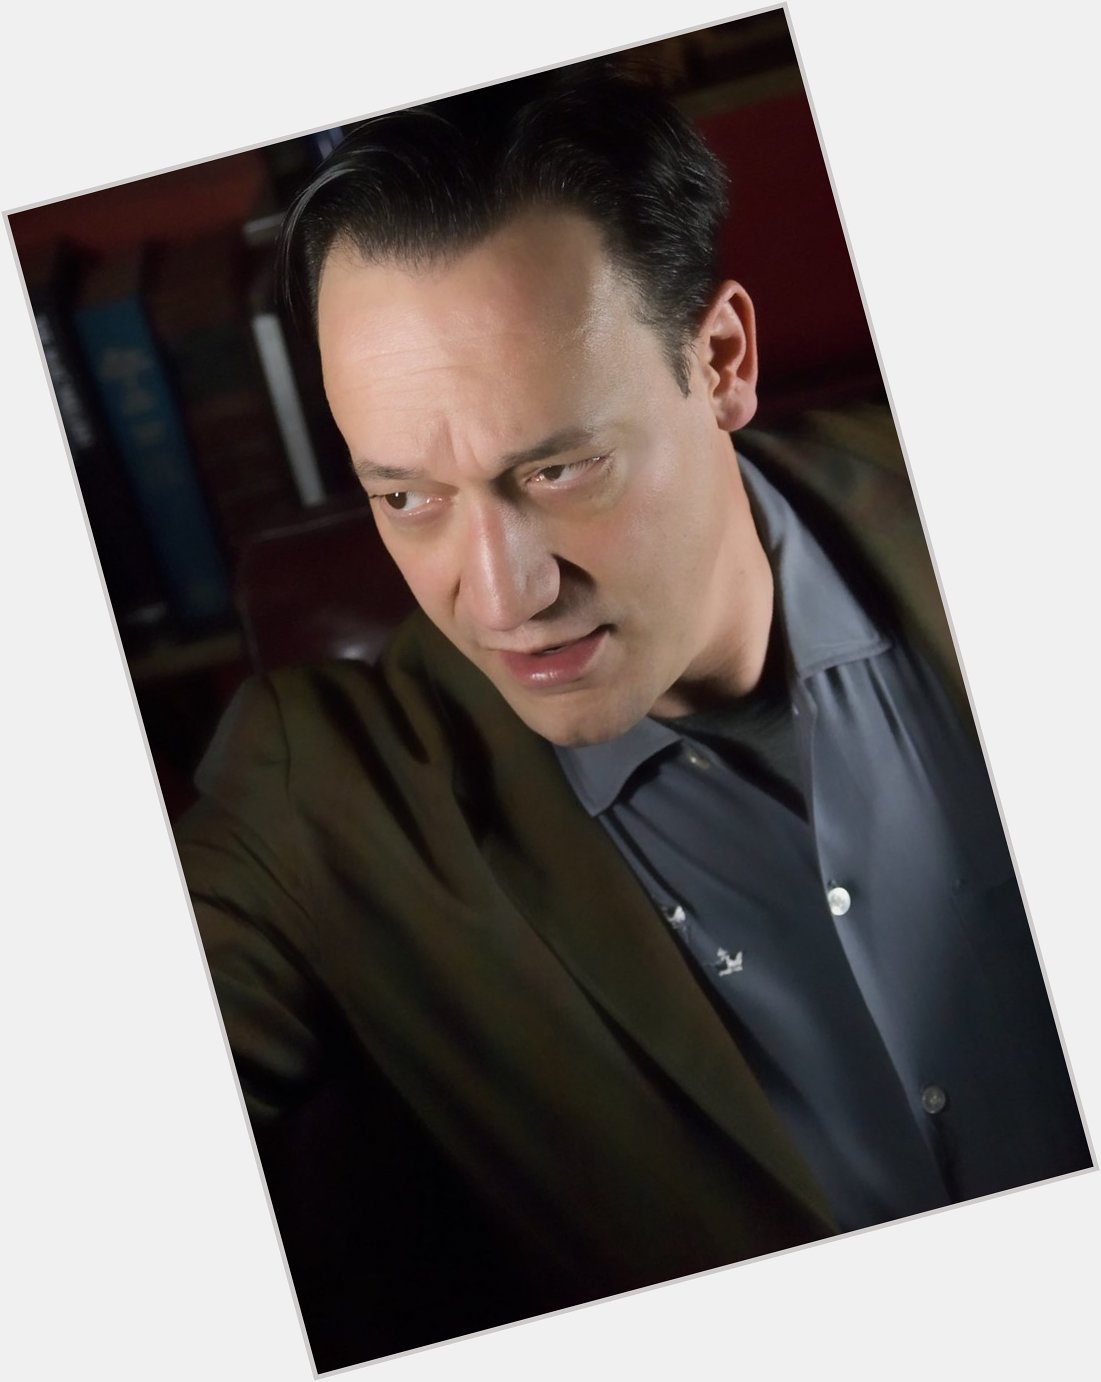 Happy Birthday Ted Raimi! Born on this day in 1965 